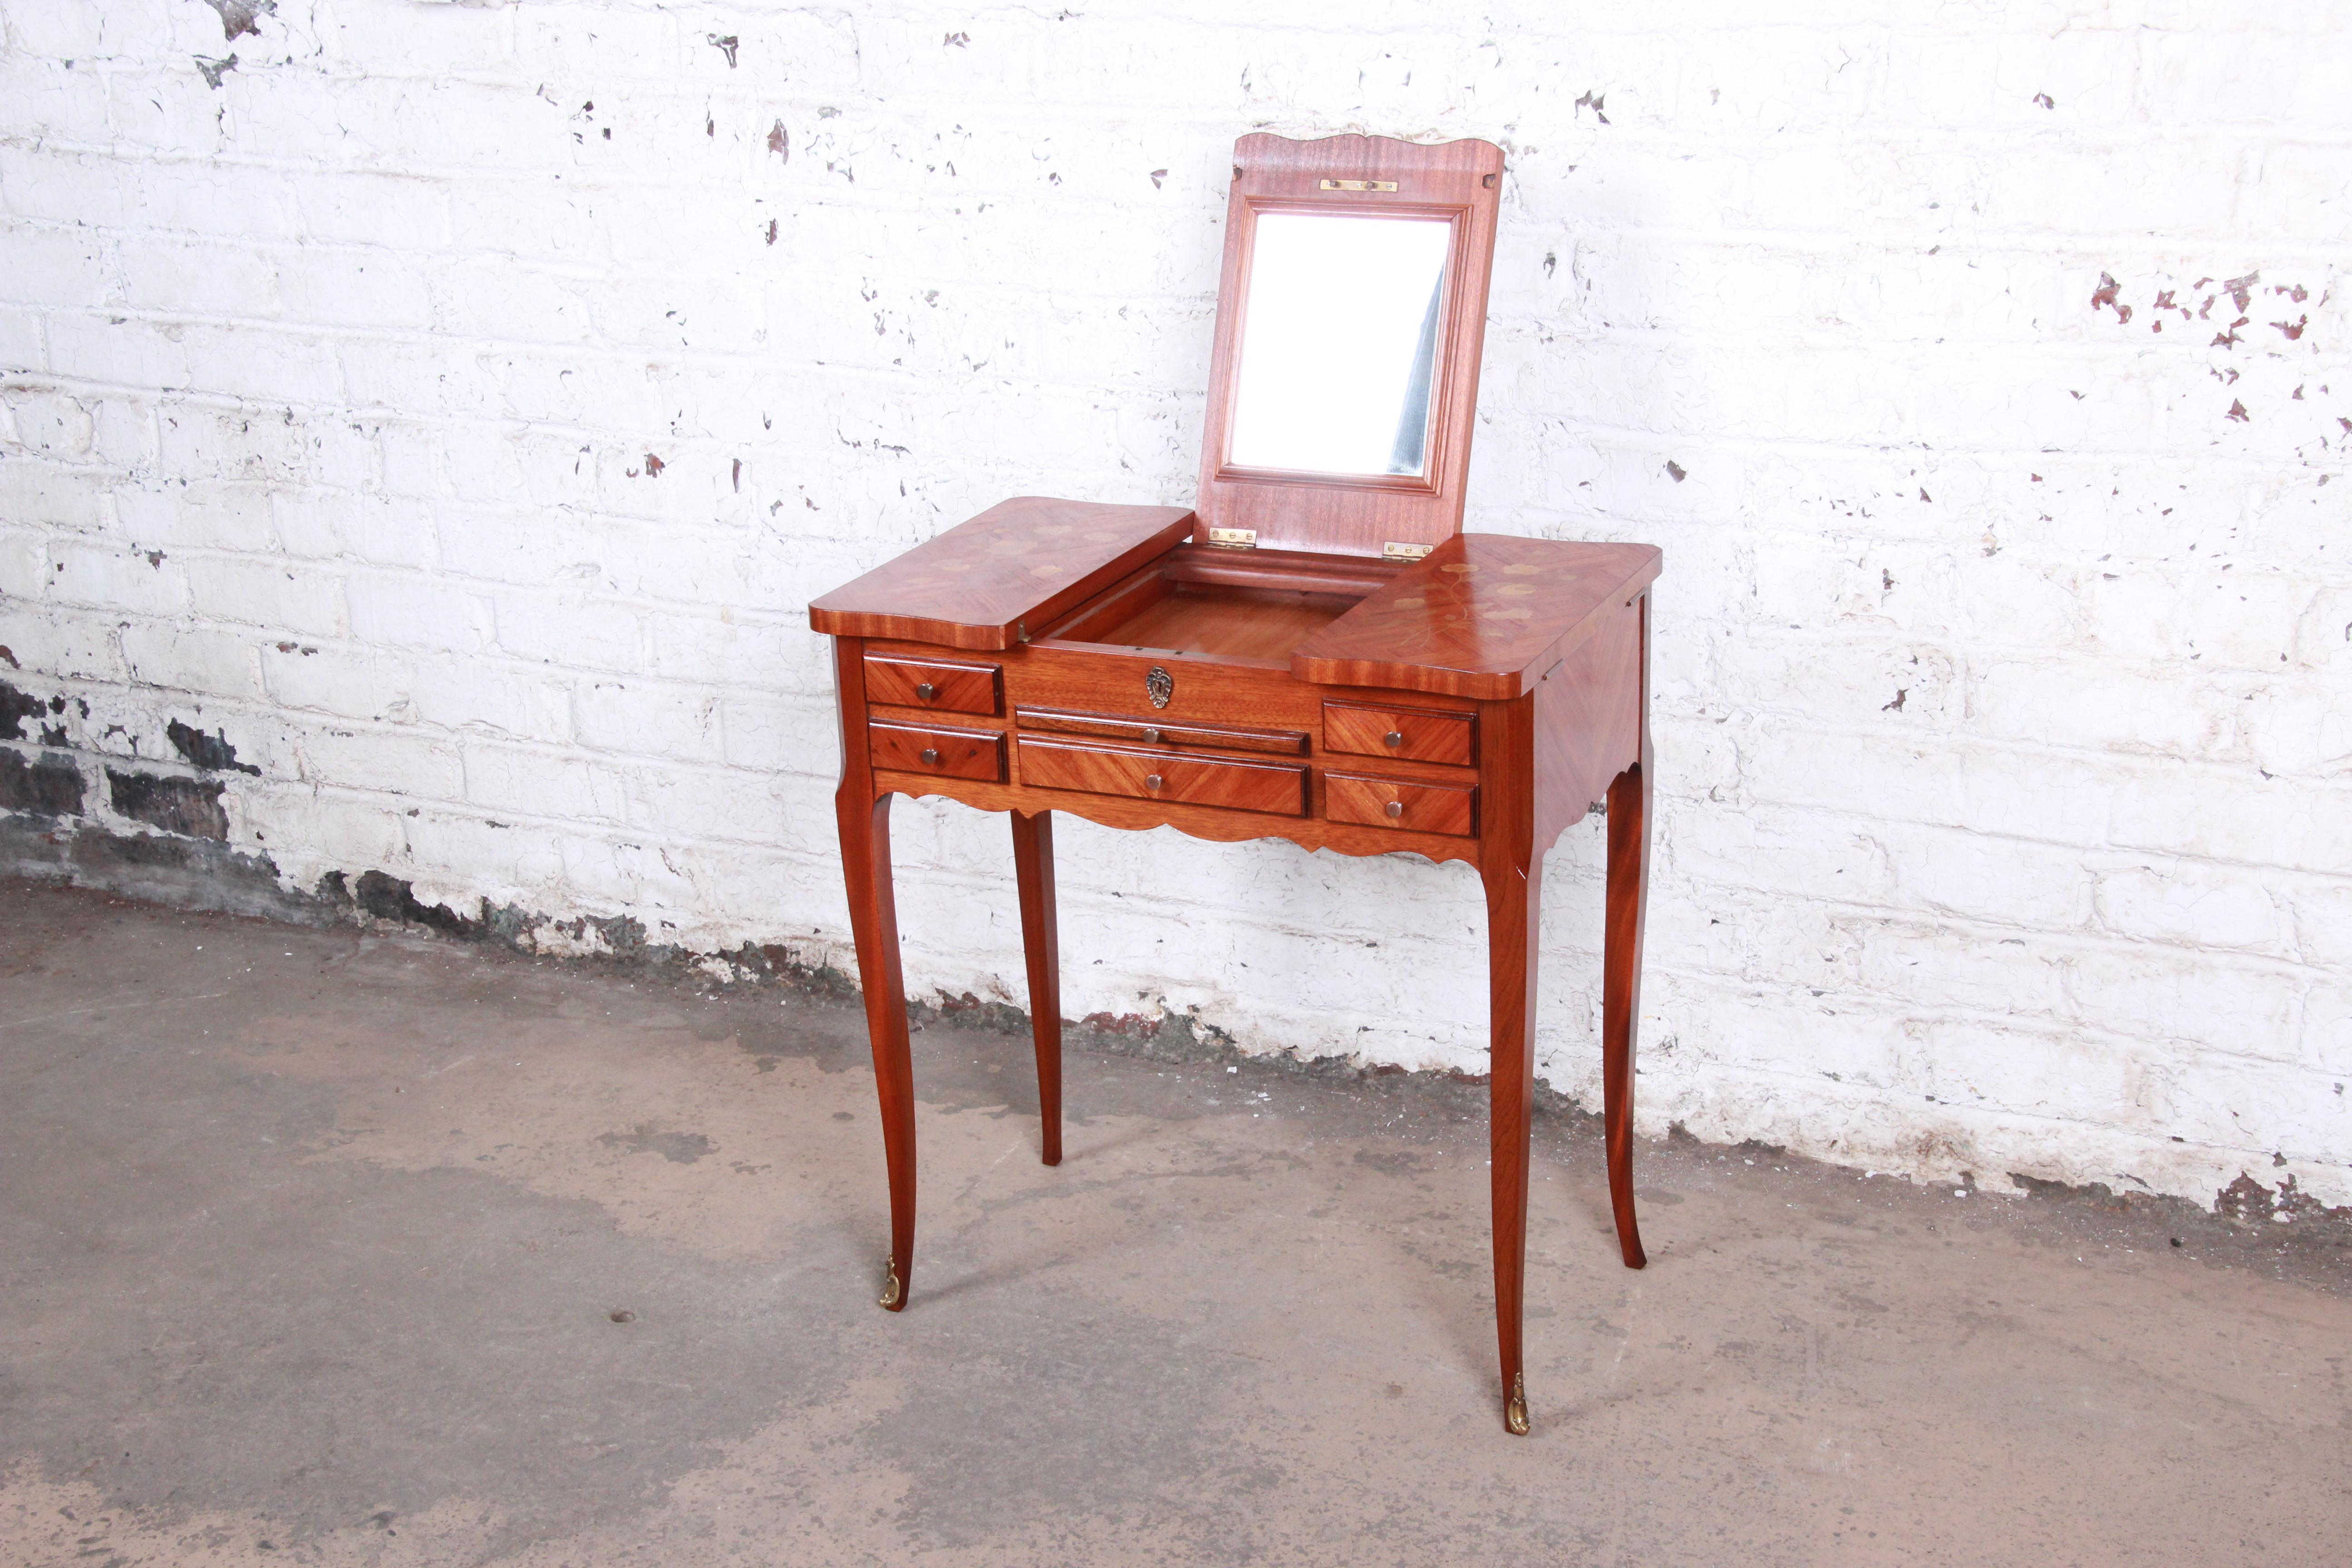 An exceptional antique French Louis XV style vanity, circa 1930s. The vanity features stunning mahogany wood grain with beautiful inlaid floral marquetry and tall cabriole legs. It has a flip-up mirror with storage compartments on each side, a